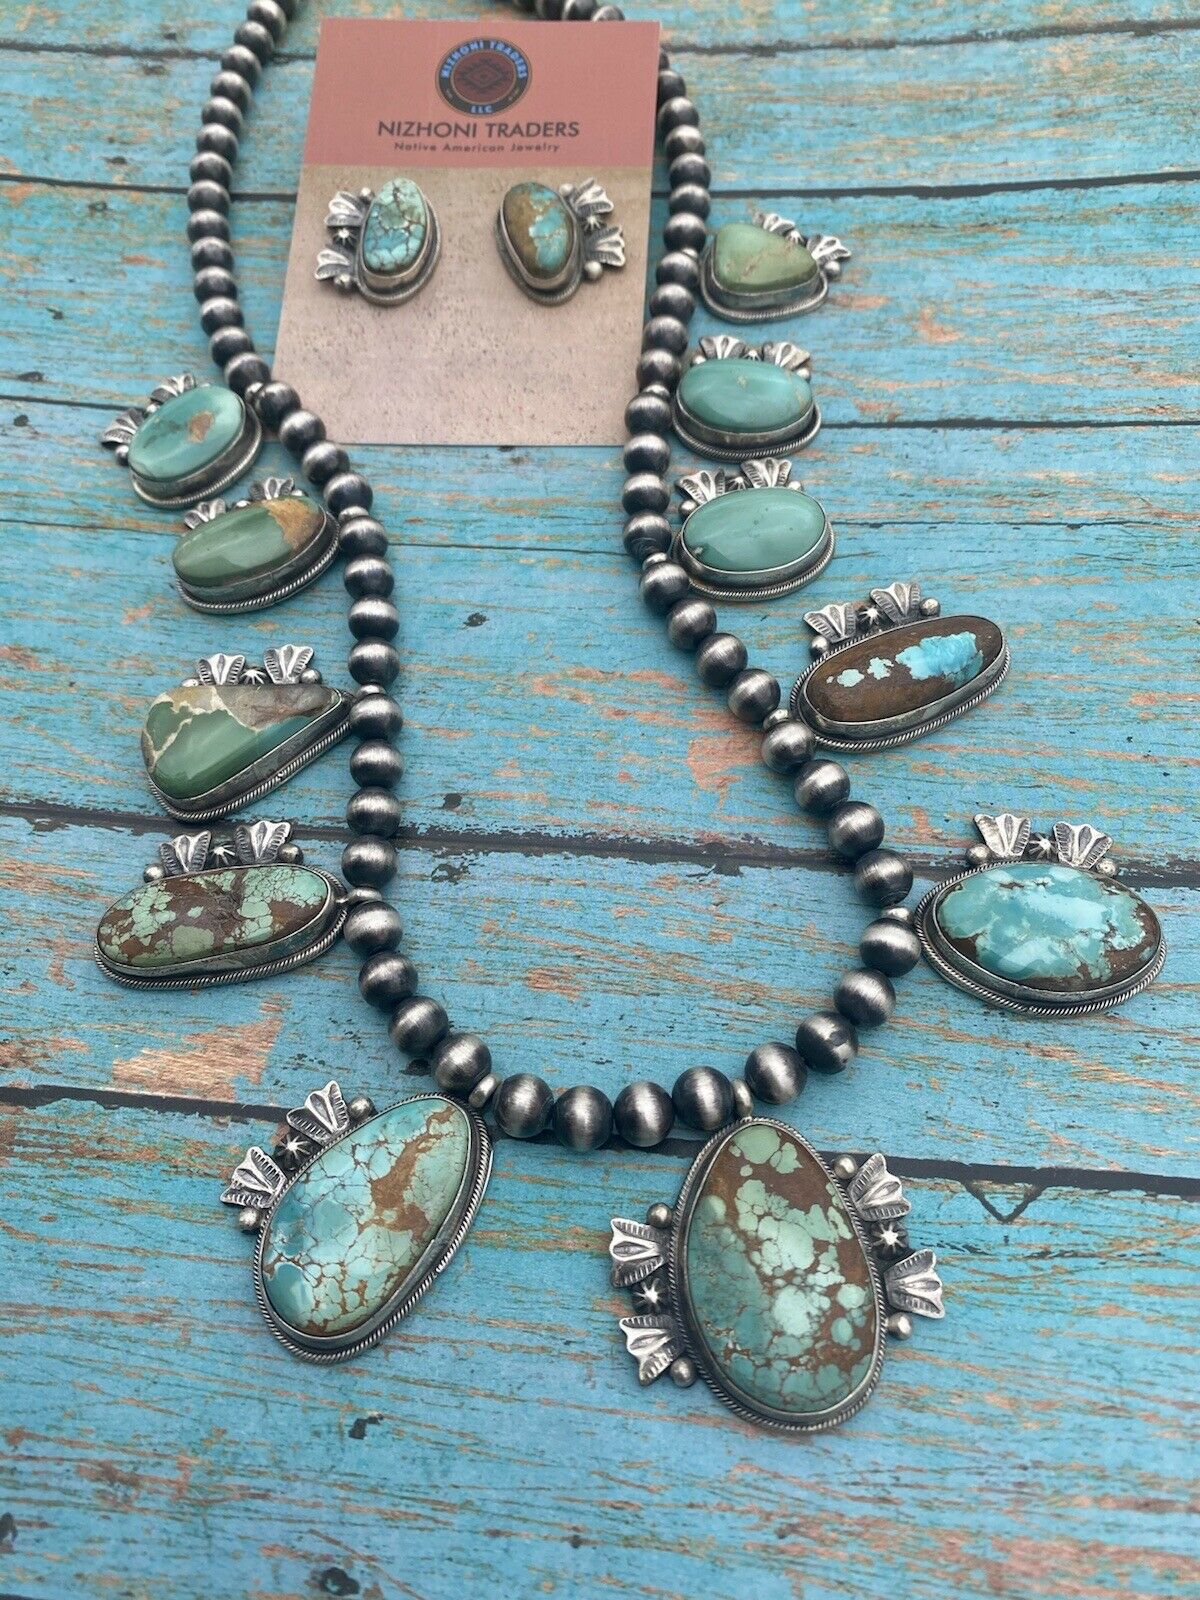 Stunning Navajo Sterling Silver Royston Turquoise Necklace & EarrIng Set